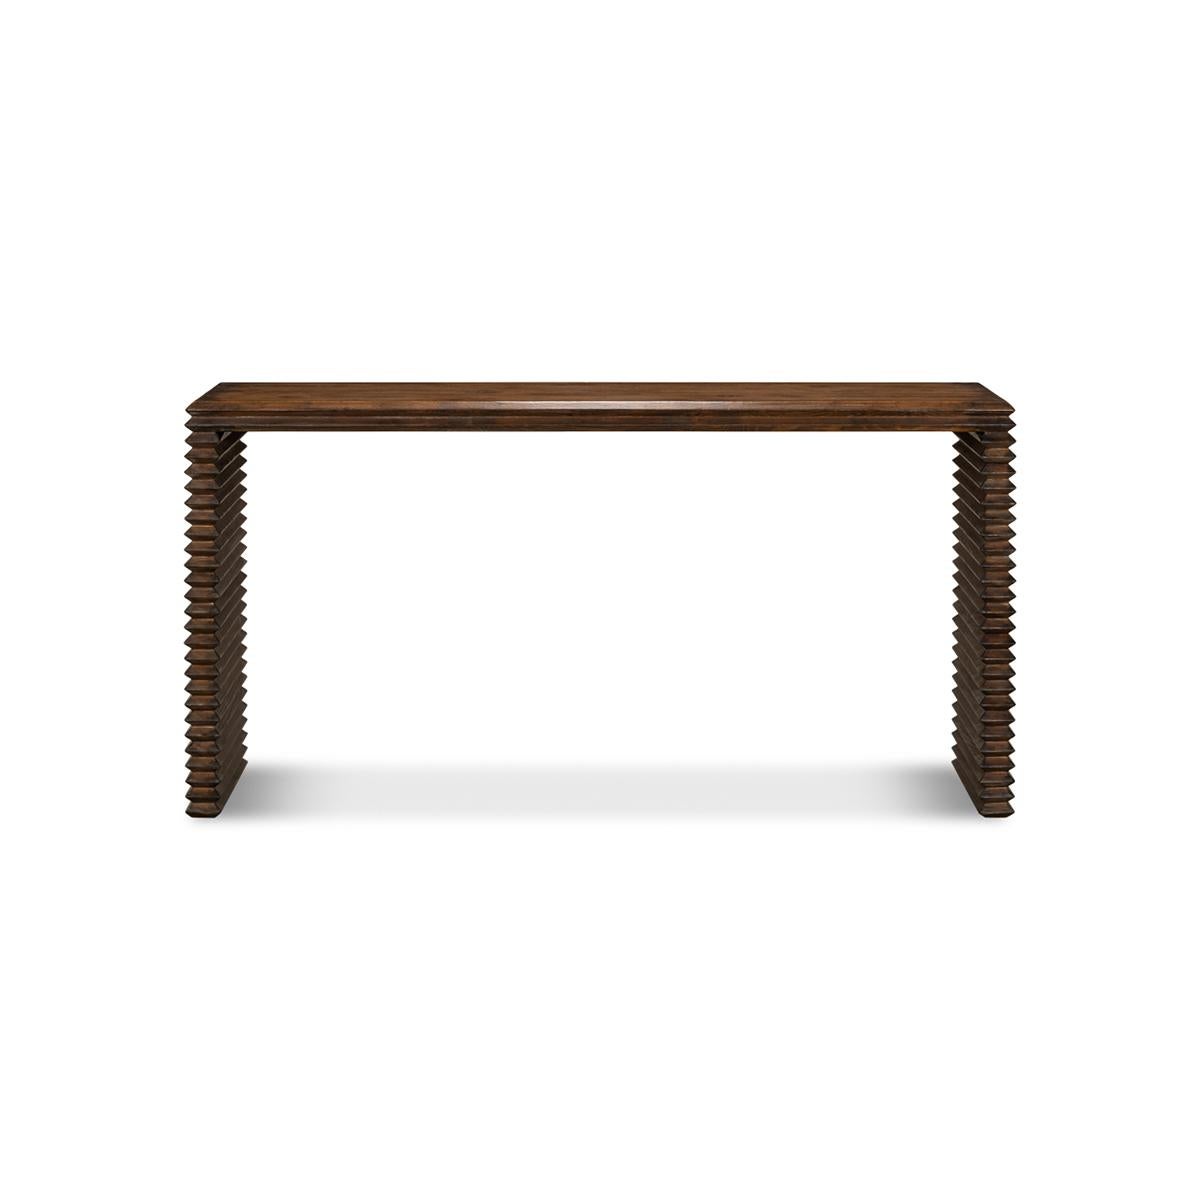 Modern stacked pine console table, made with reclaimed pine in a French brown eclectic stained finish. A simple silhouette wrapped in geometric form with a nod to historical Brutalist design.

Dimensions: 63